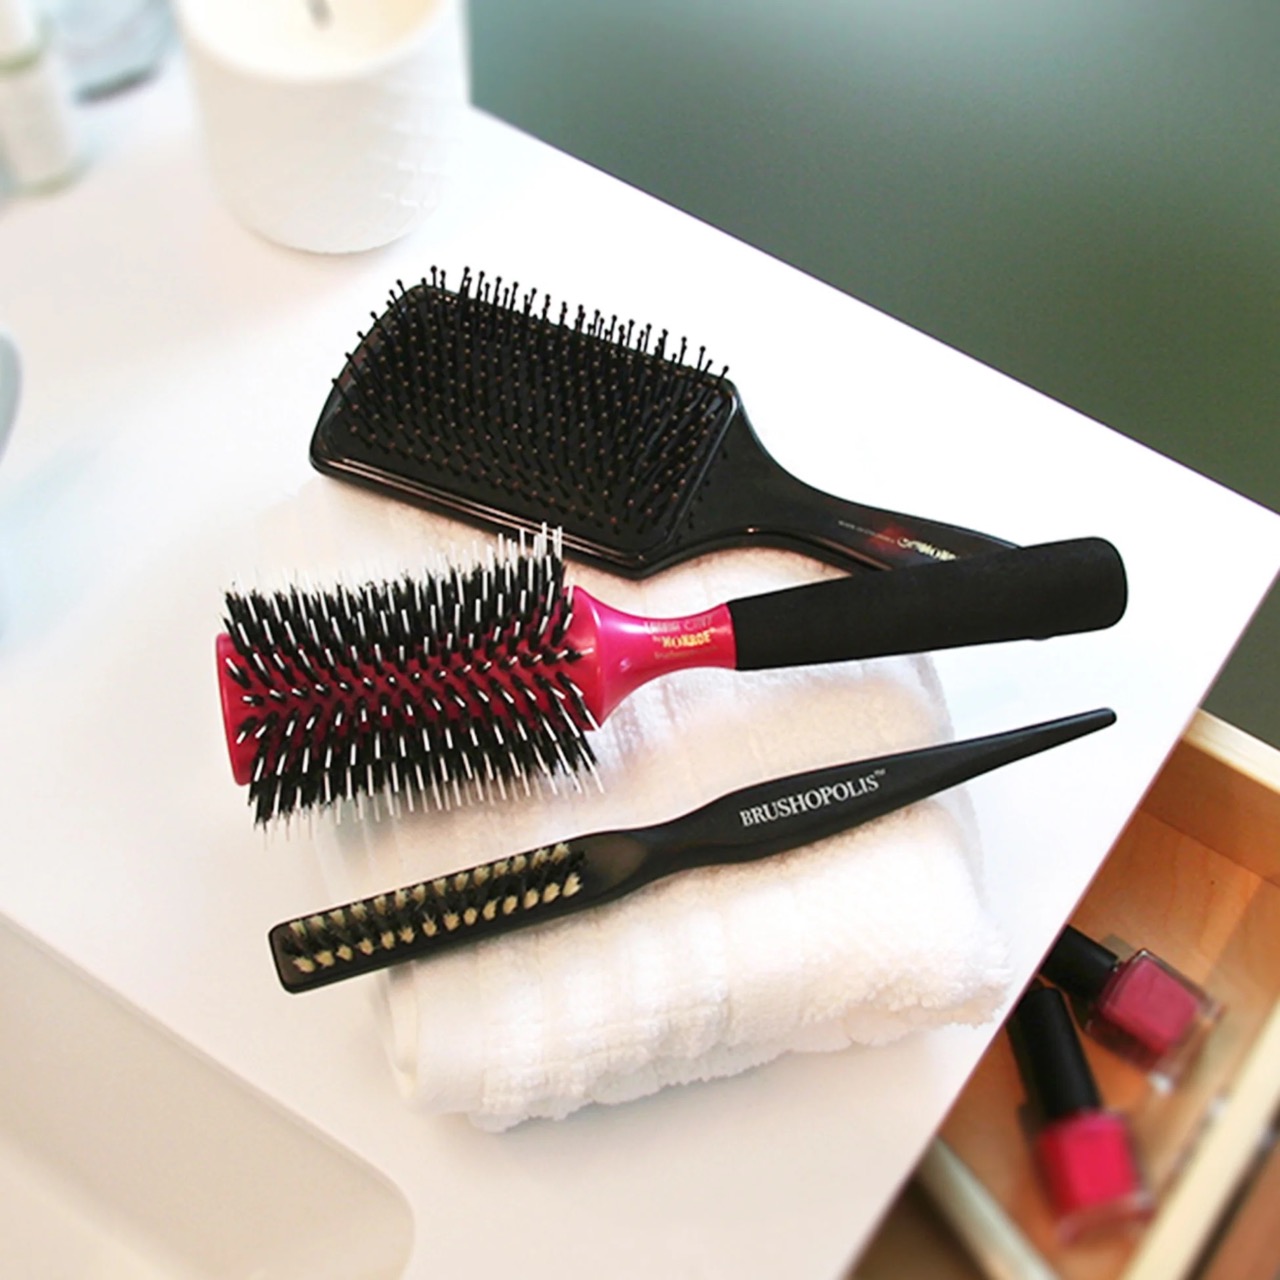 How To Store Hair Brushes